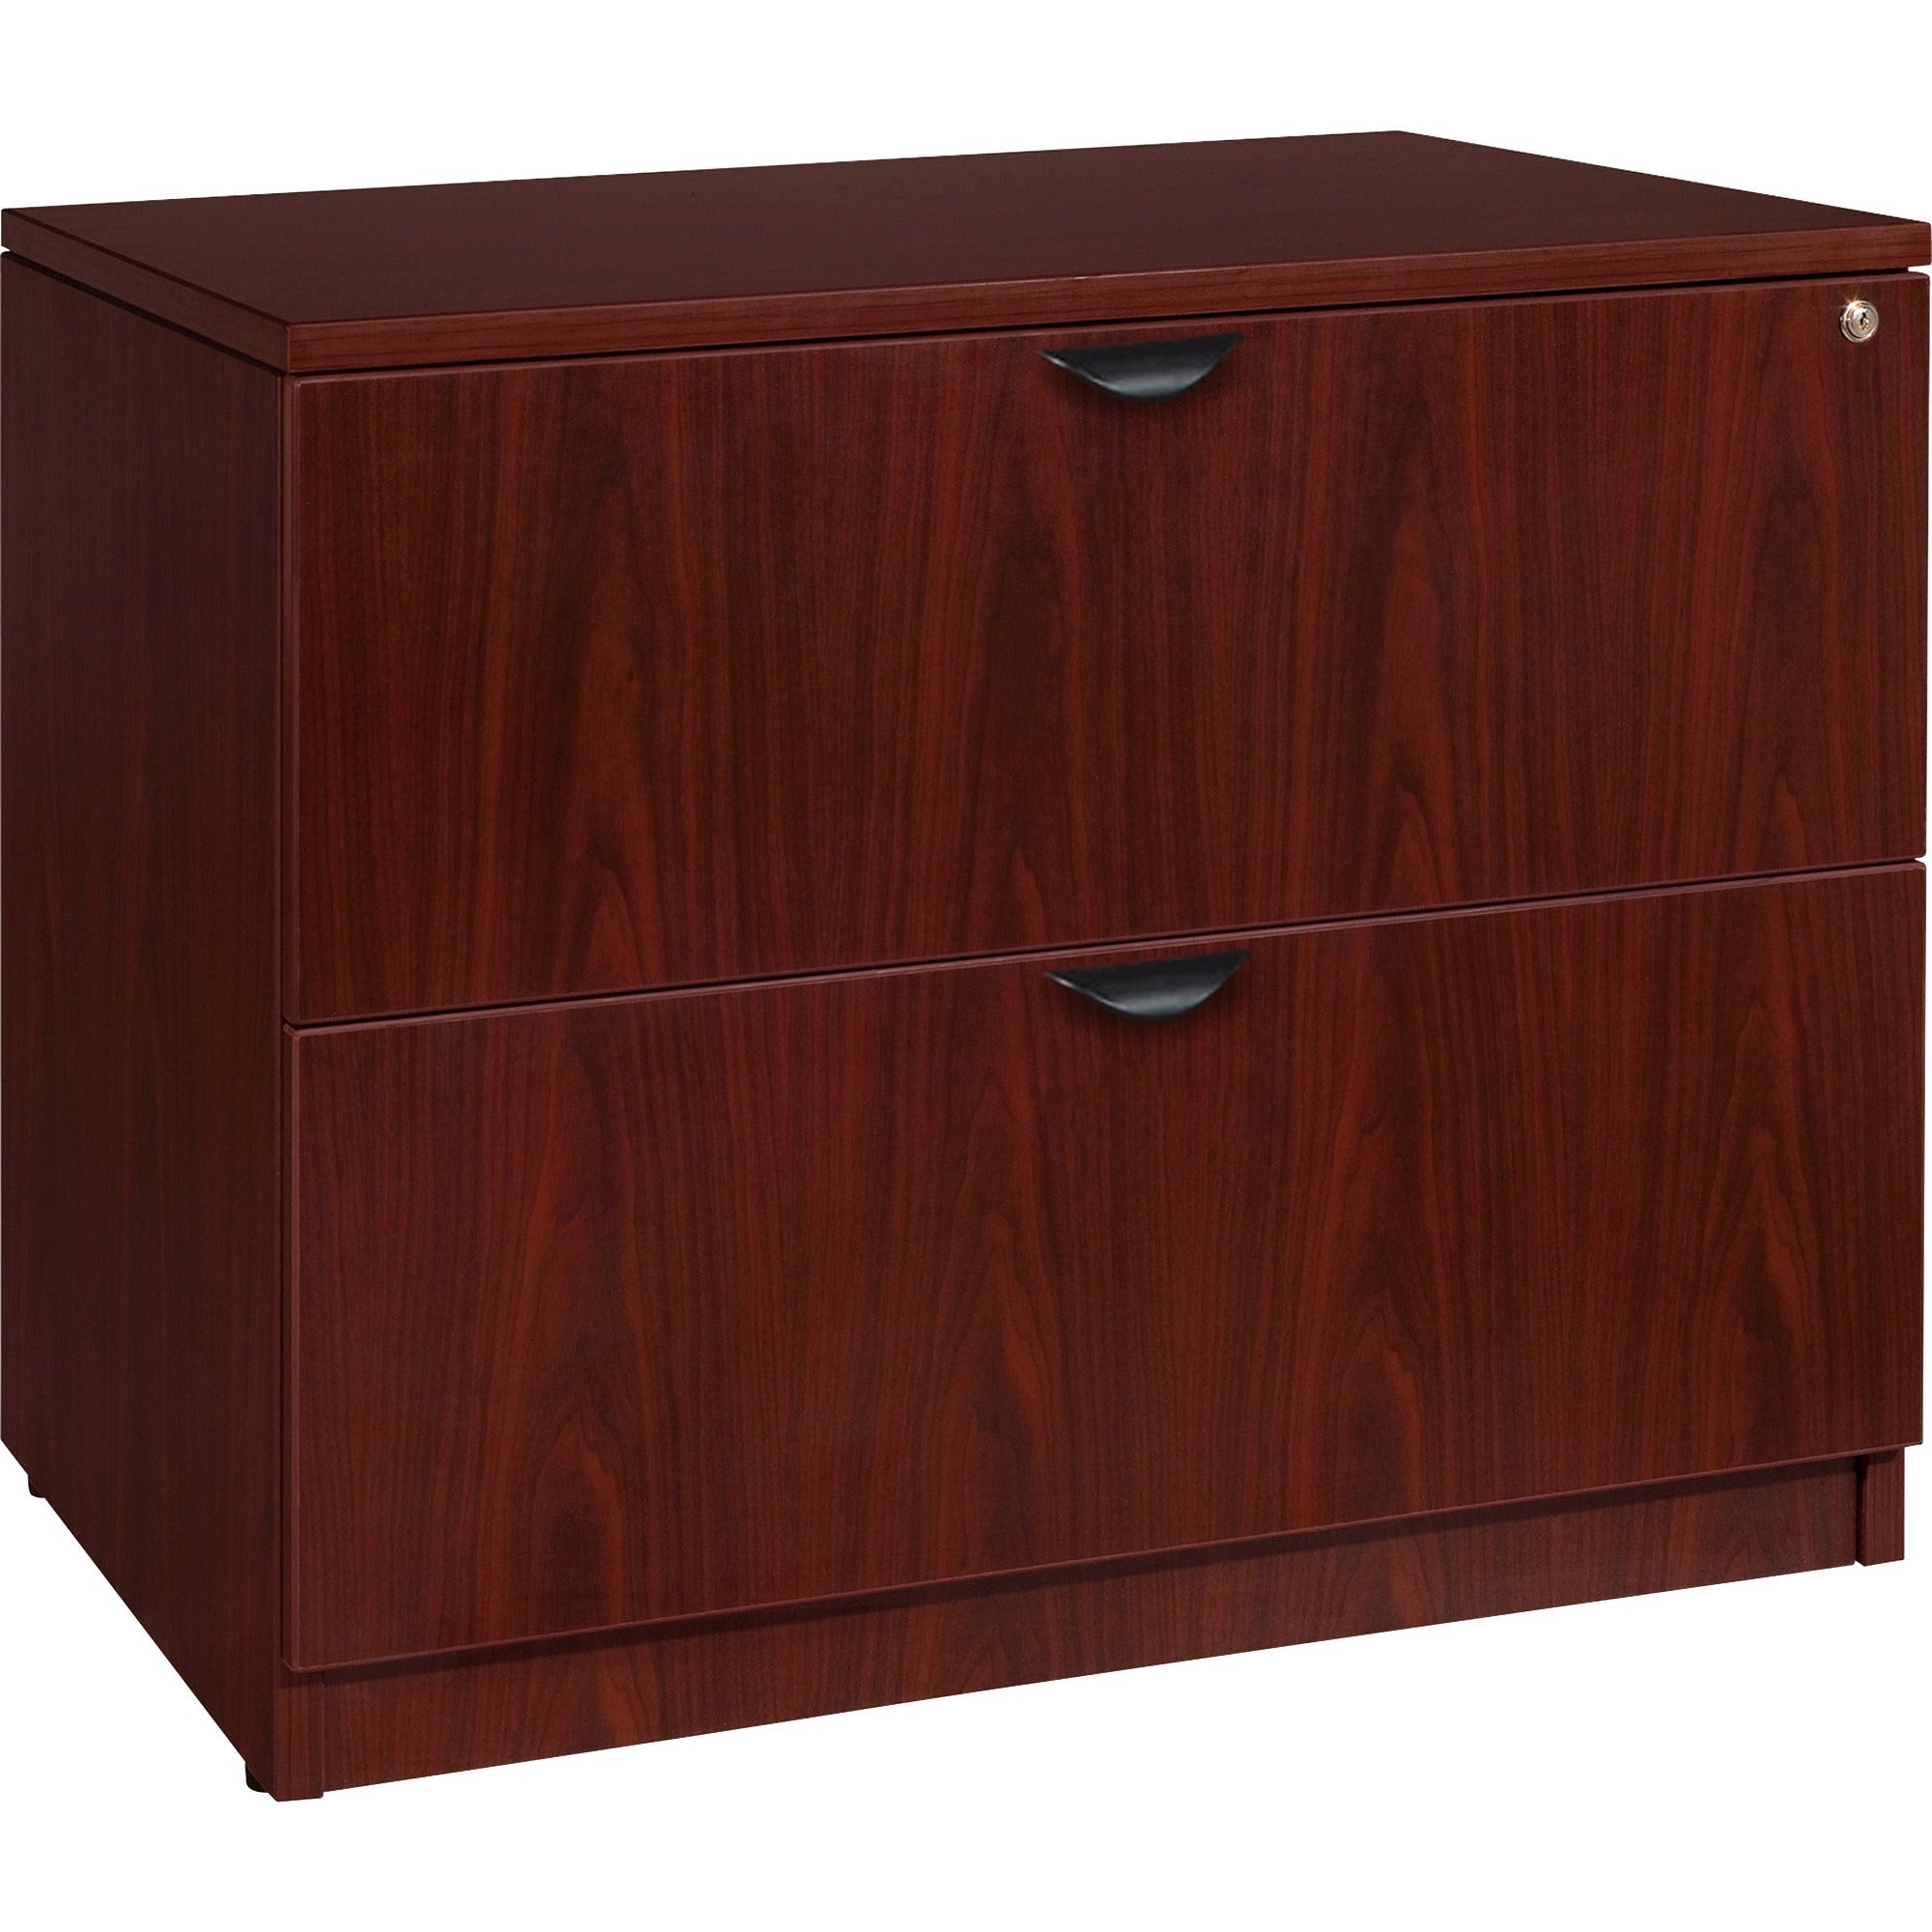 Lorell Prominence 2.0 Lateral File - 36" x 22"29" - 2 x File Drawer(s) - Band Edge - Material: Laminate - Finish: Mahogany - 1